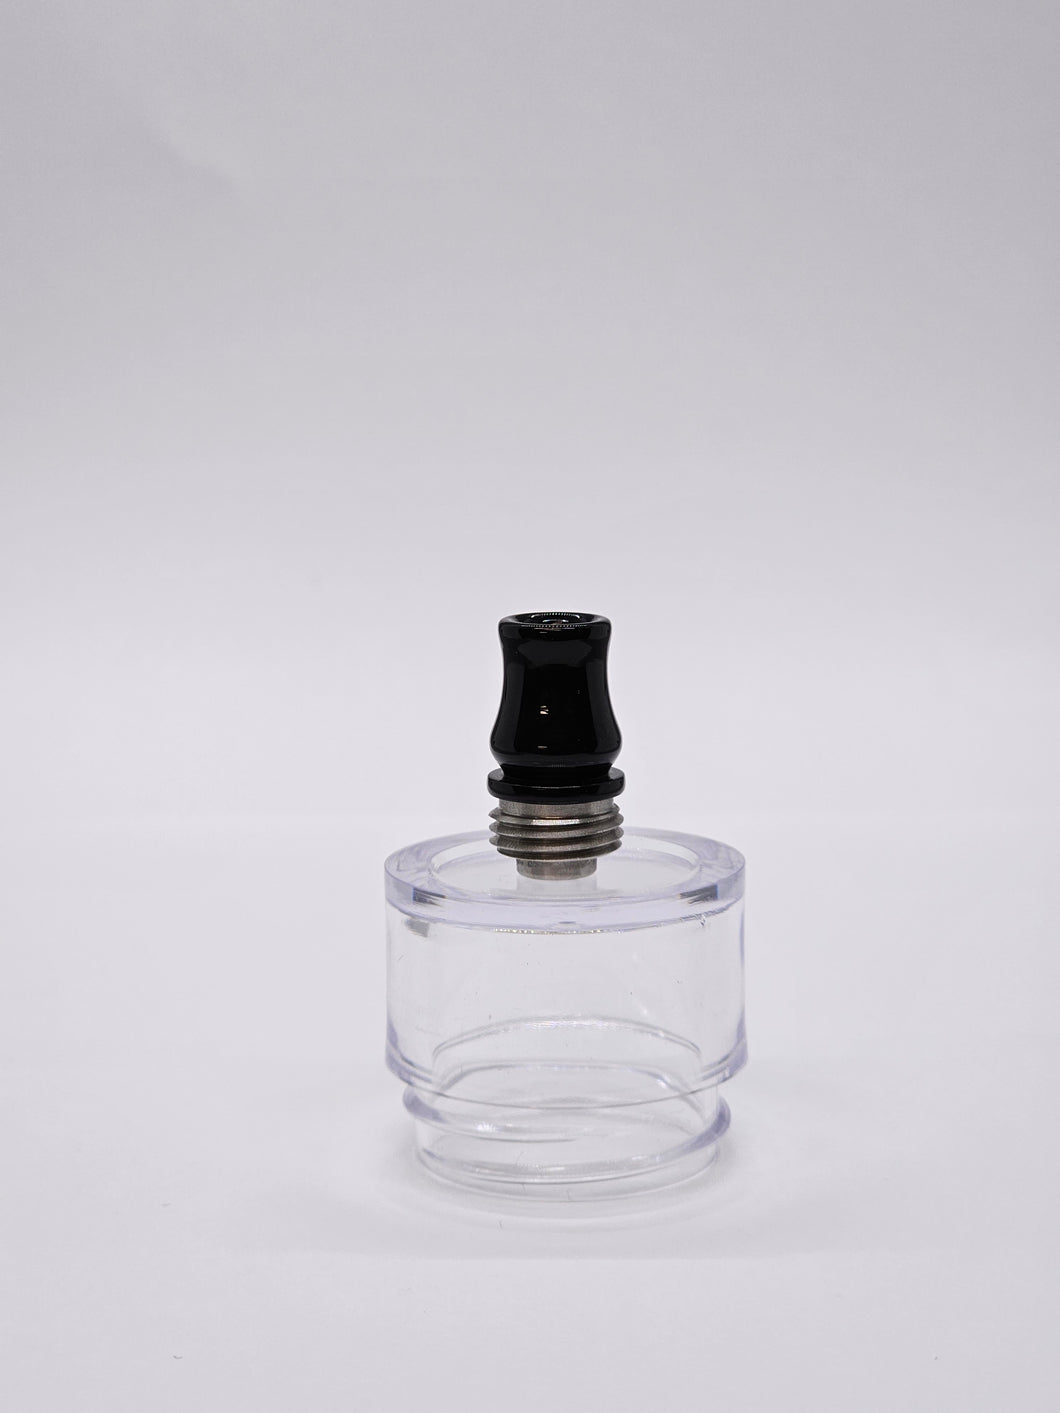 The Scotty XL - Made To Order BORO Integrated Drip Tip